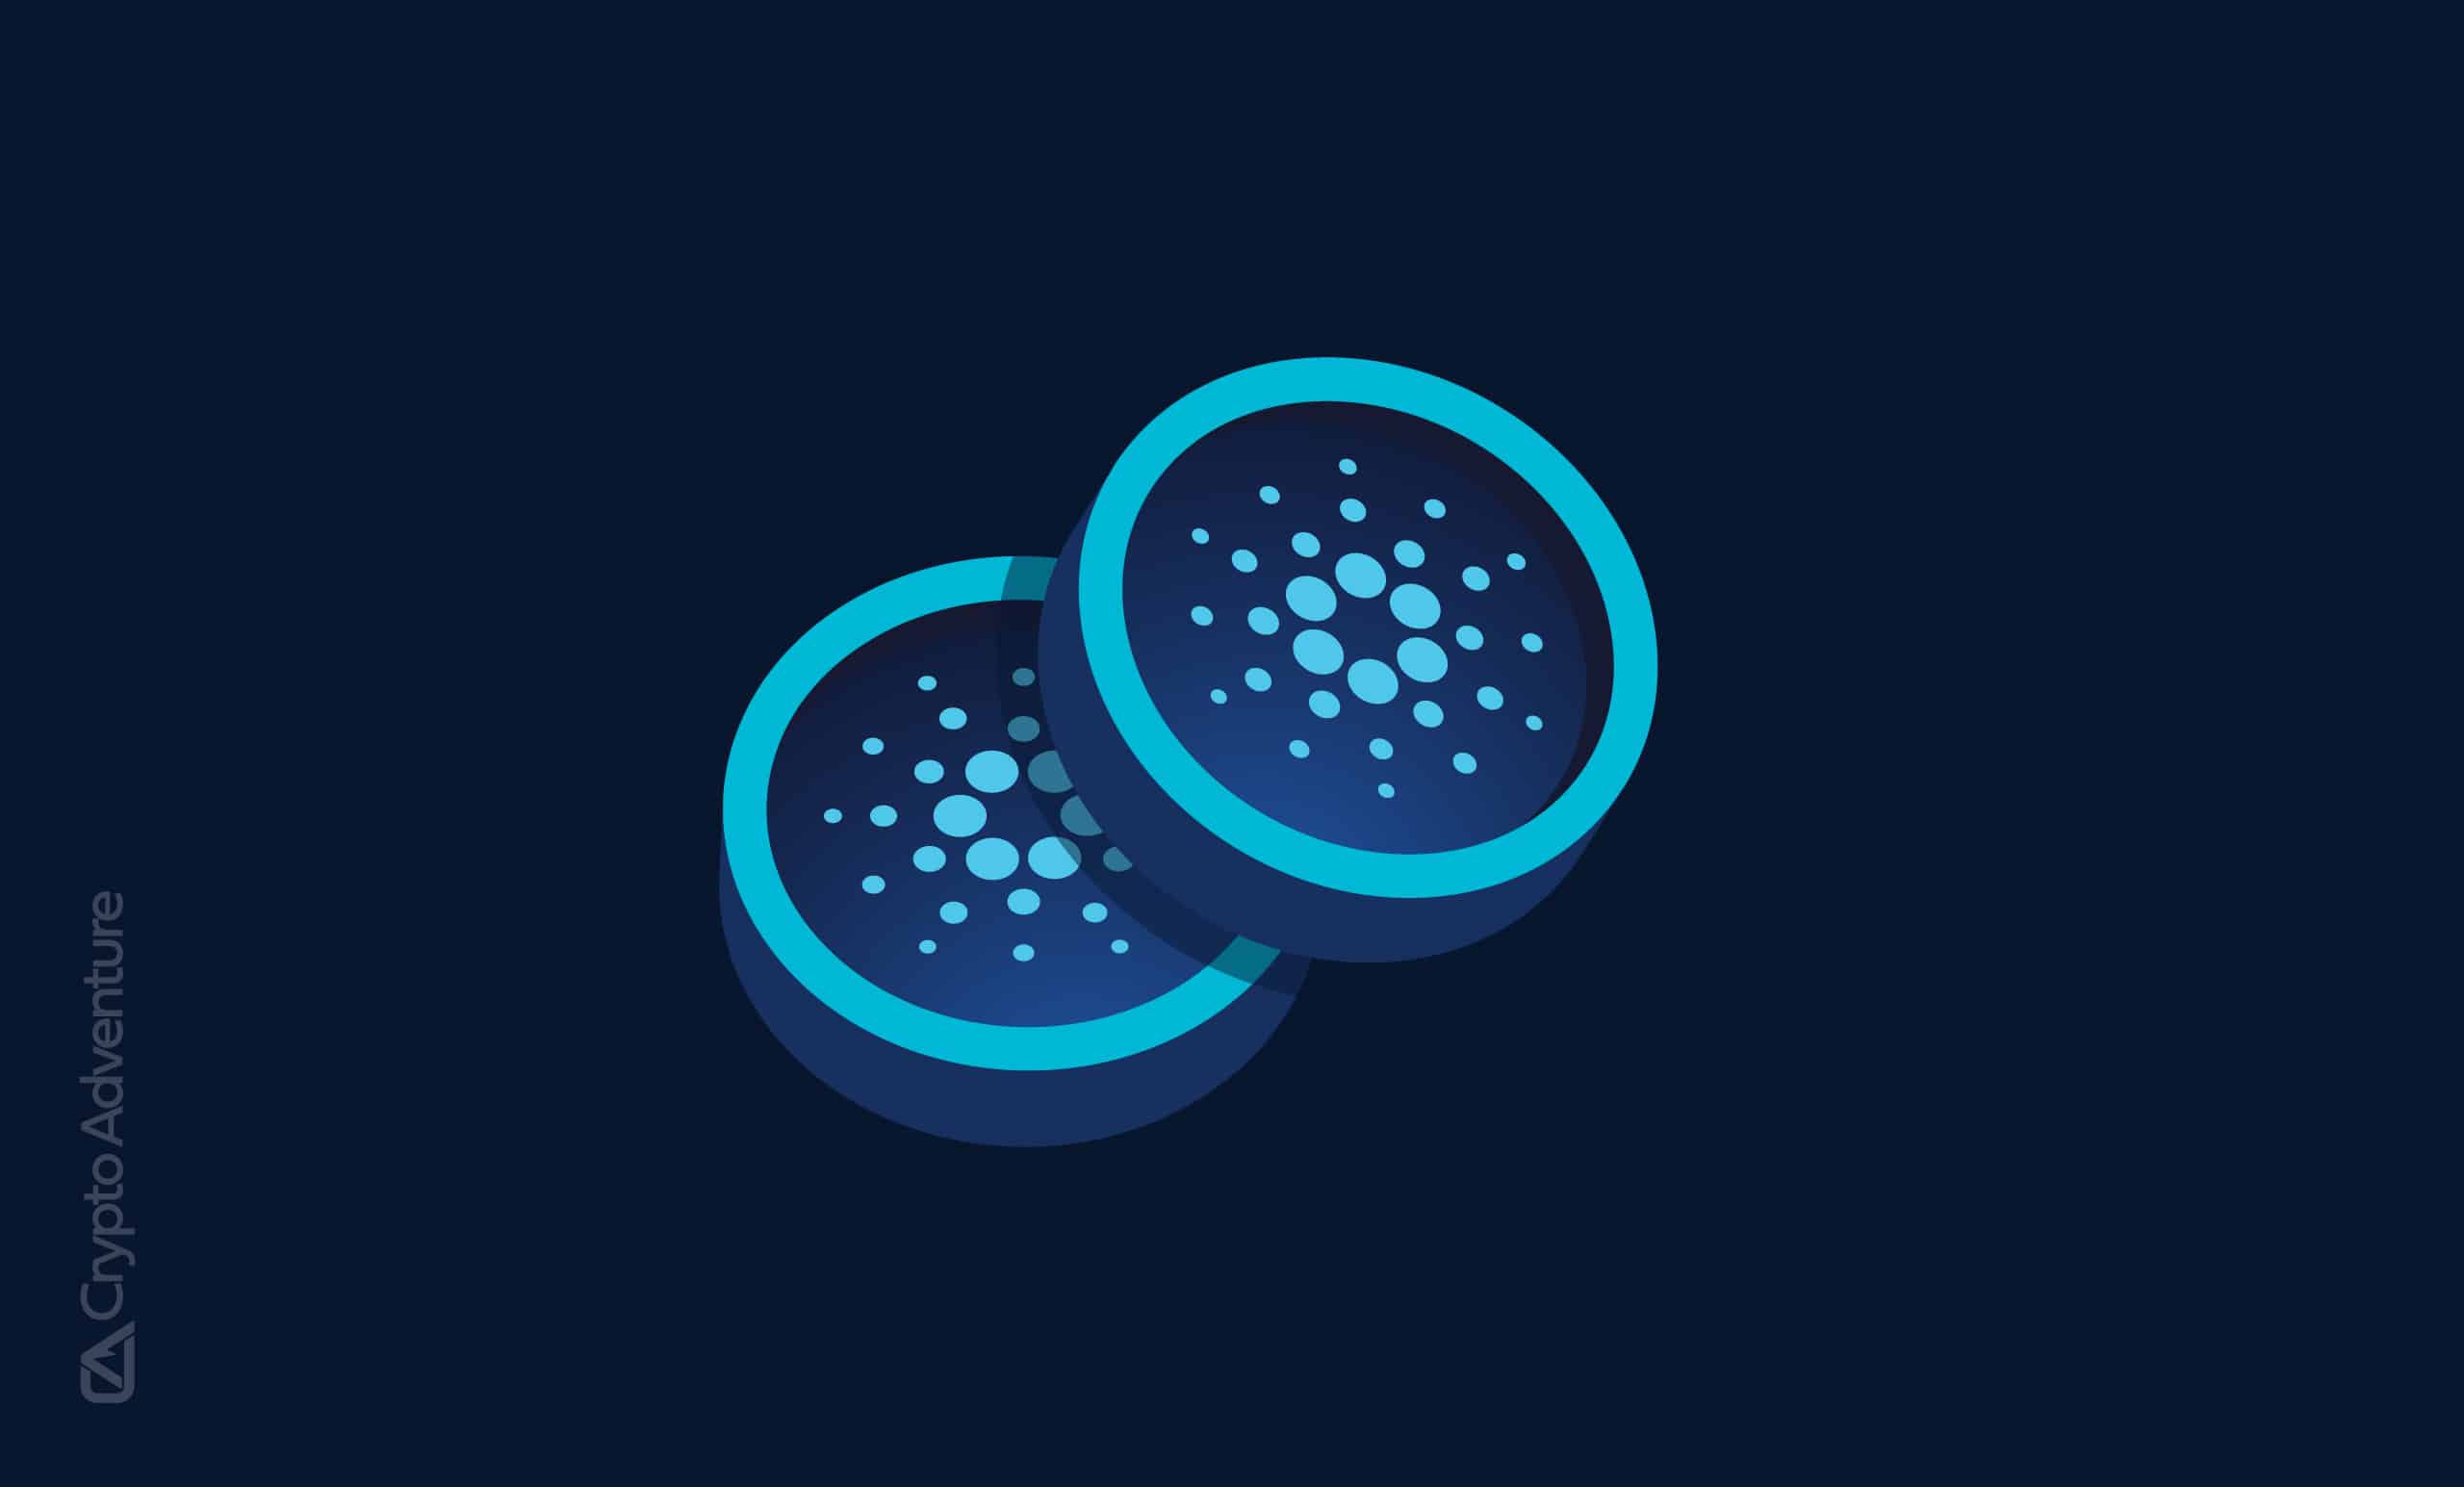 Cardano - ADA Price Today, Live Charts and News